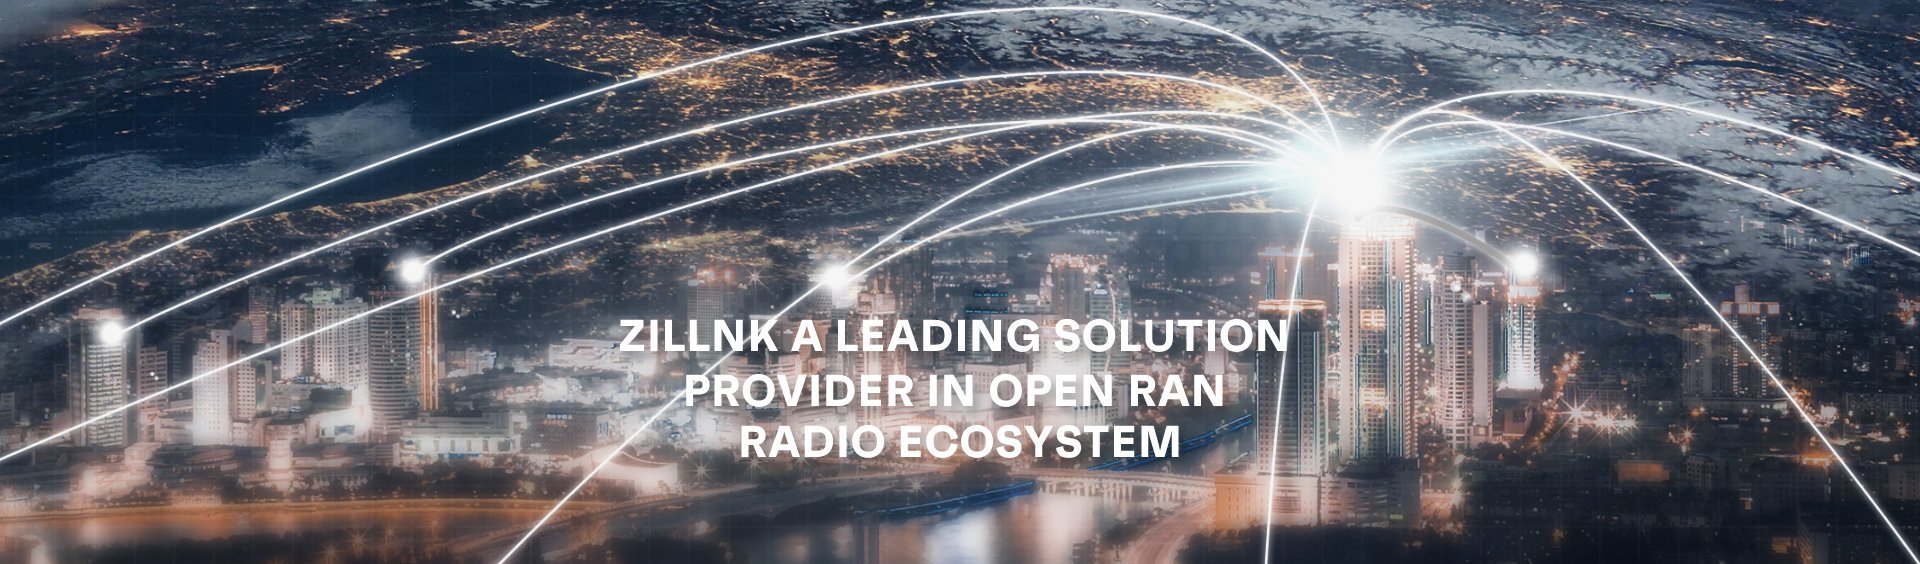 Zillnk a leading solution provider in Open RAN Radio ecosystem